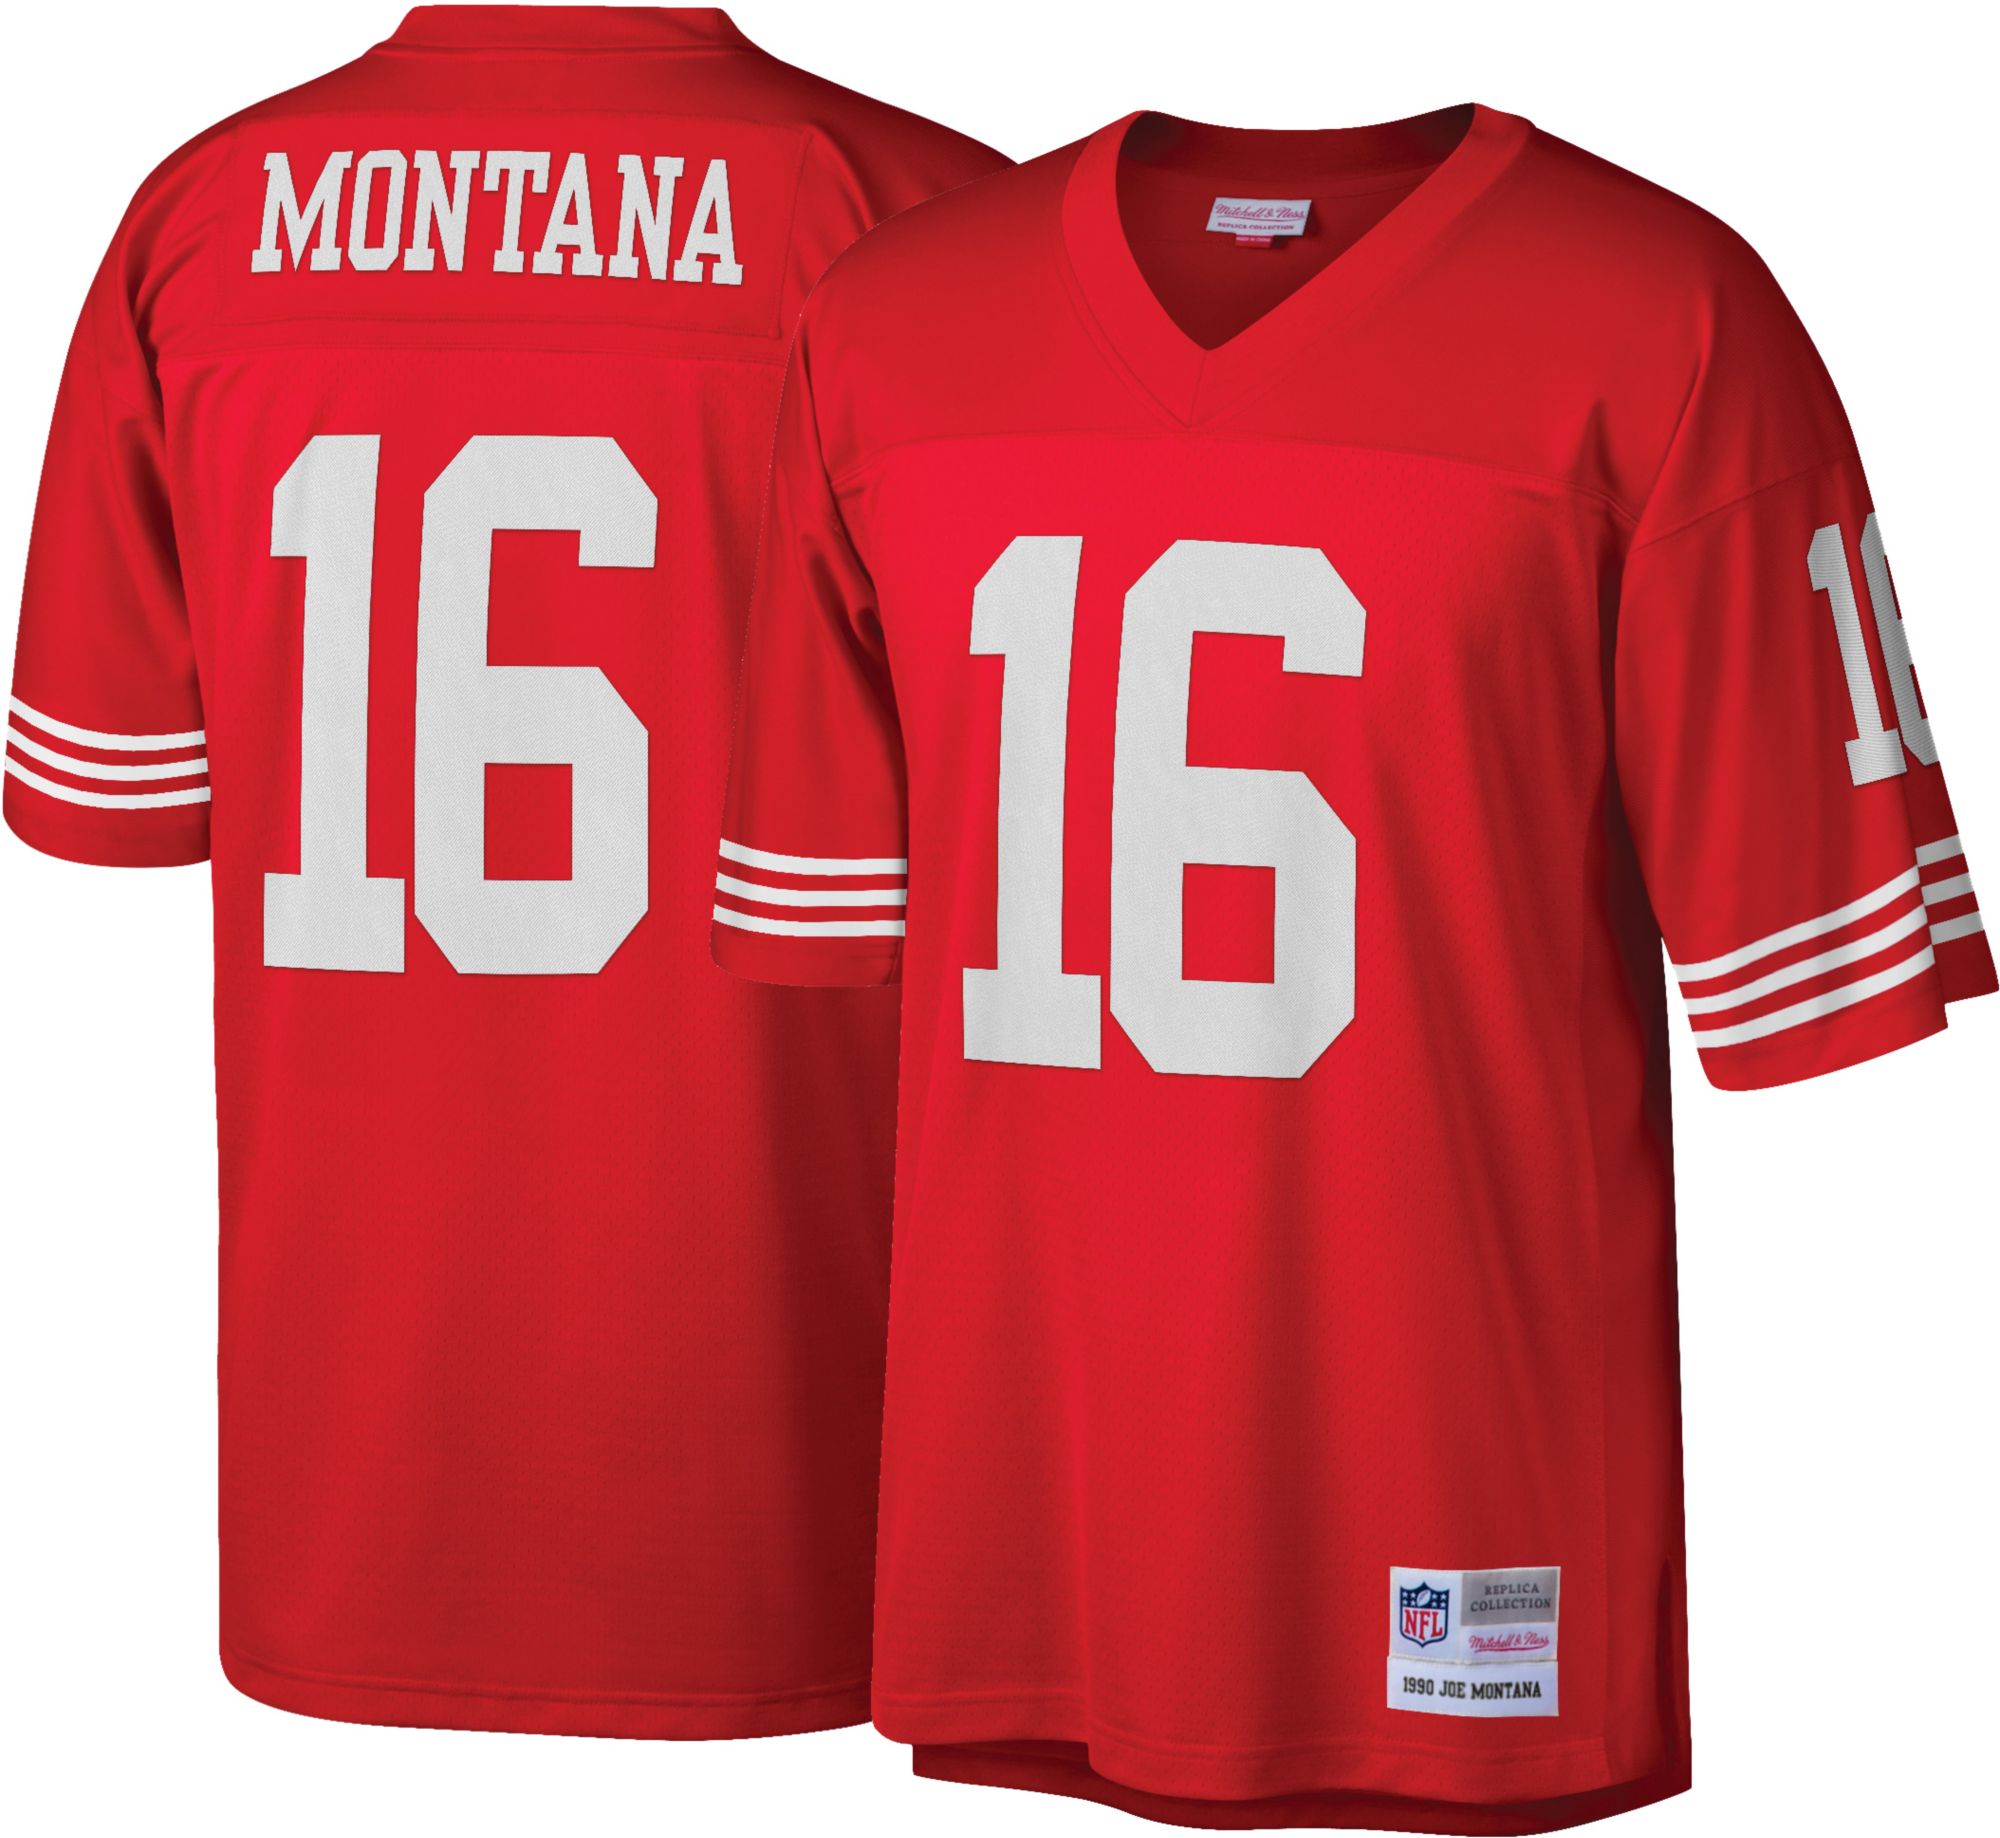 1990 49ers jersey